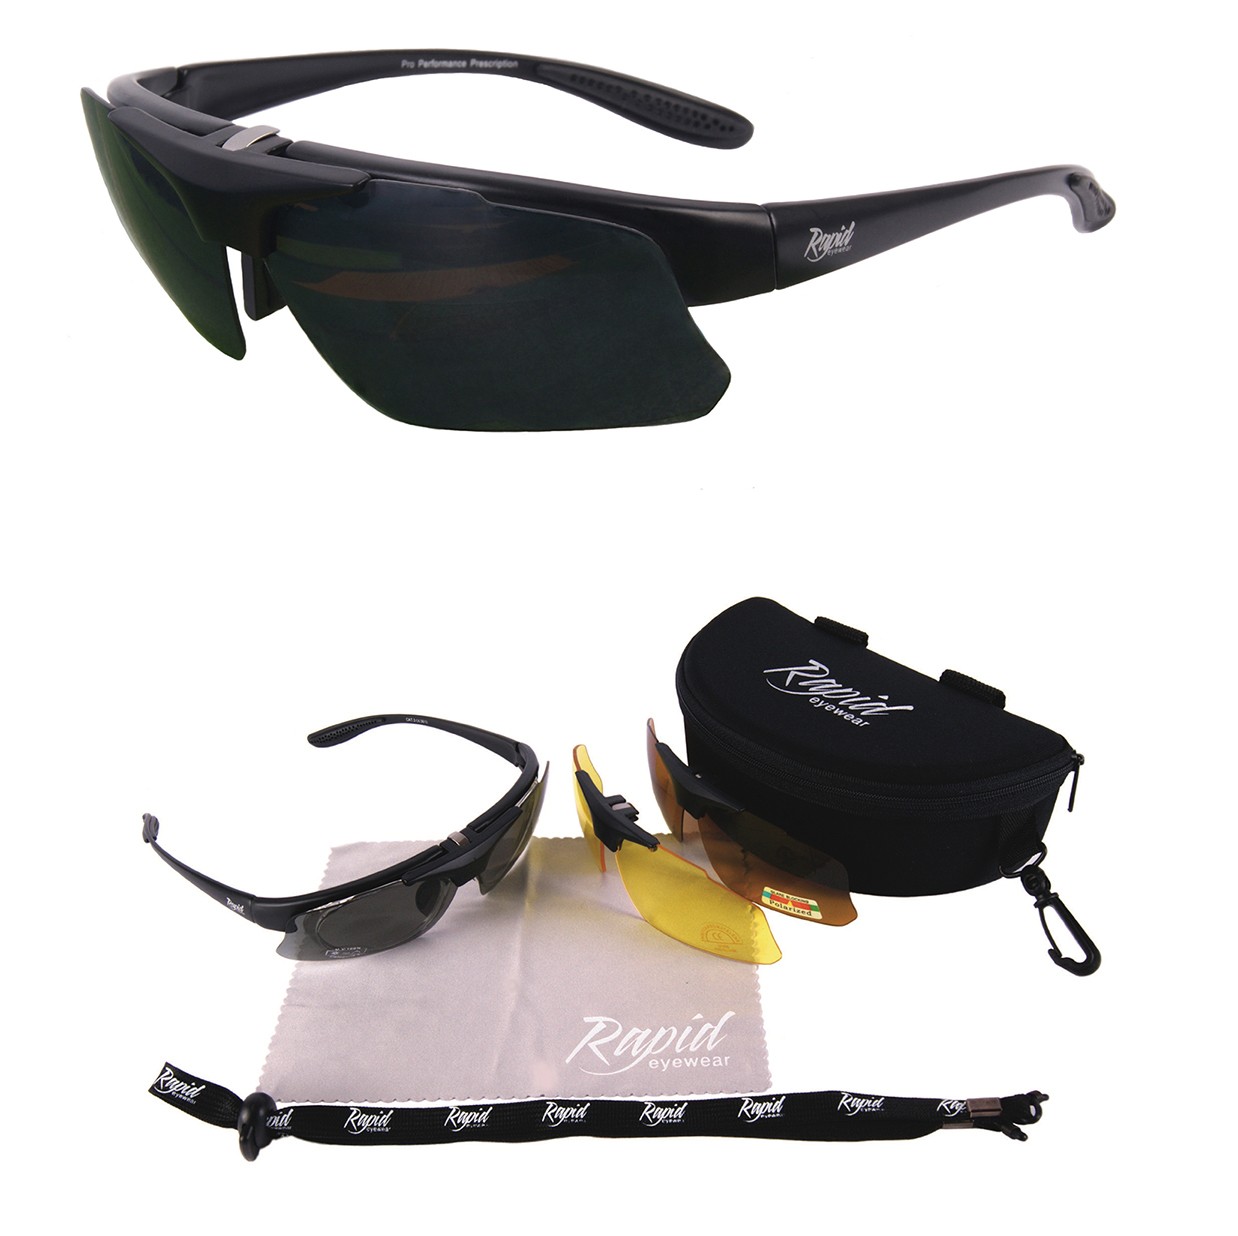 Prescription Sports Glasses for Adults: Anti-Shock Protection for